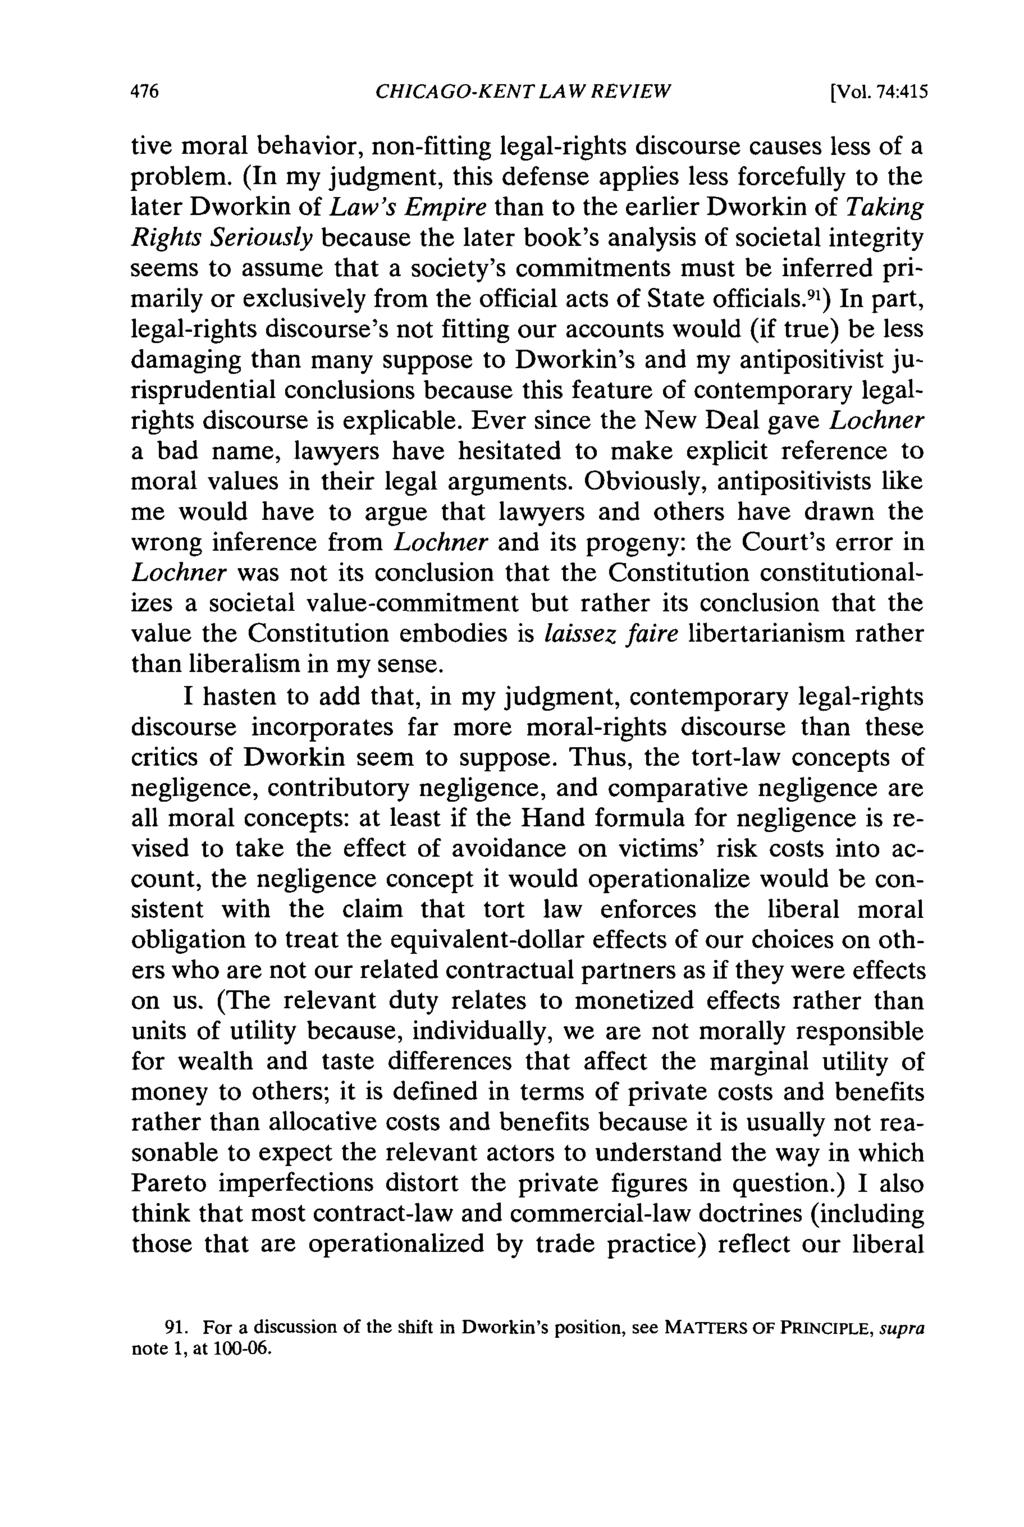 CHICAGO-KENT LAW REVIEW [Vol. 74:415 tive moral behavior, non-fitting legal-rights discourse causes less of a problem.